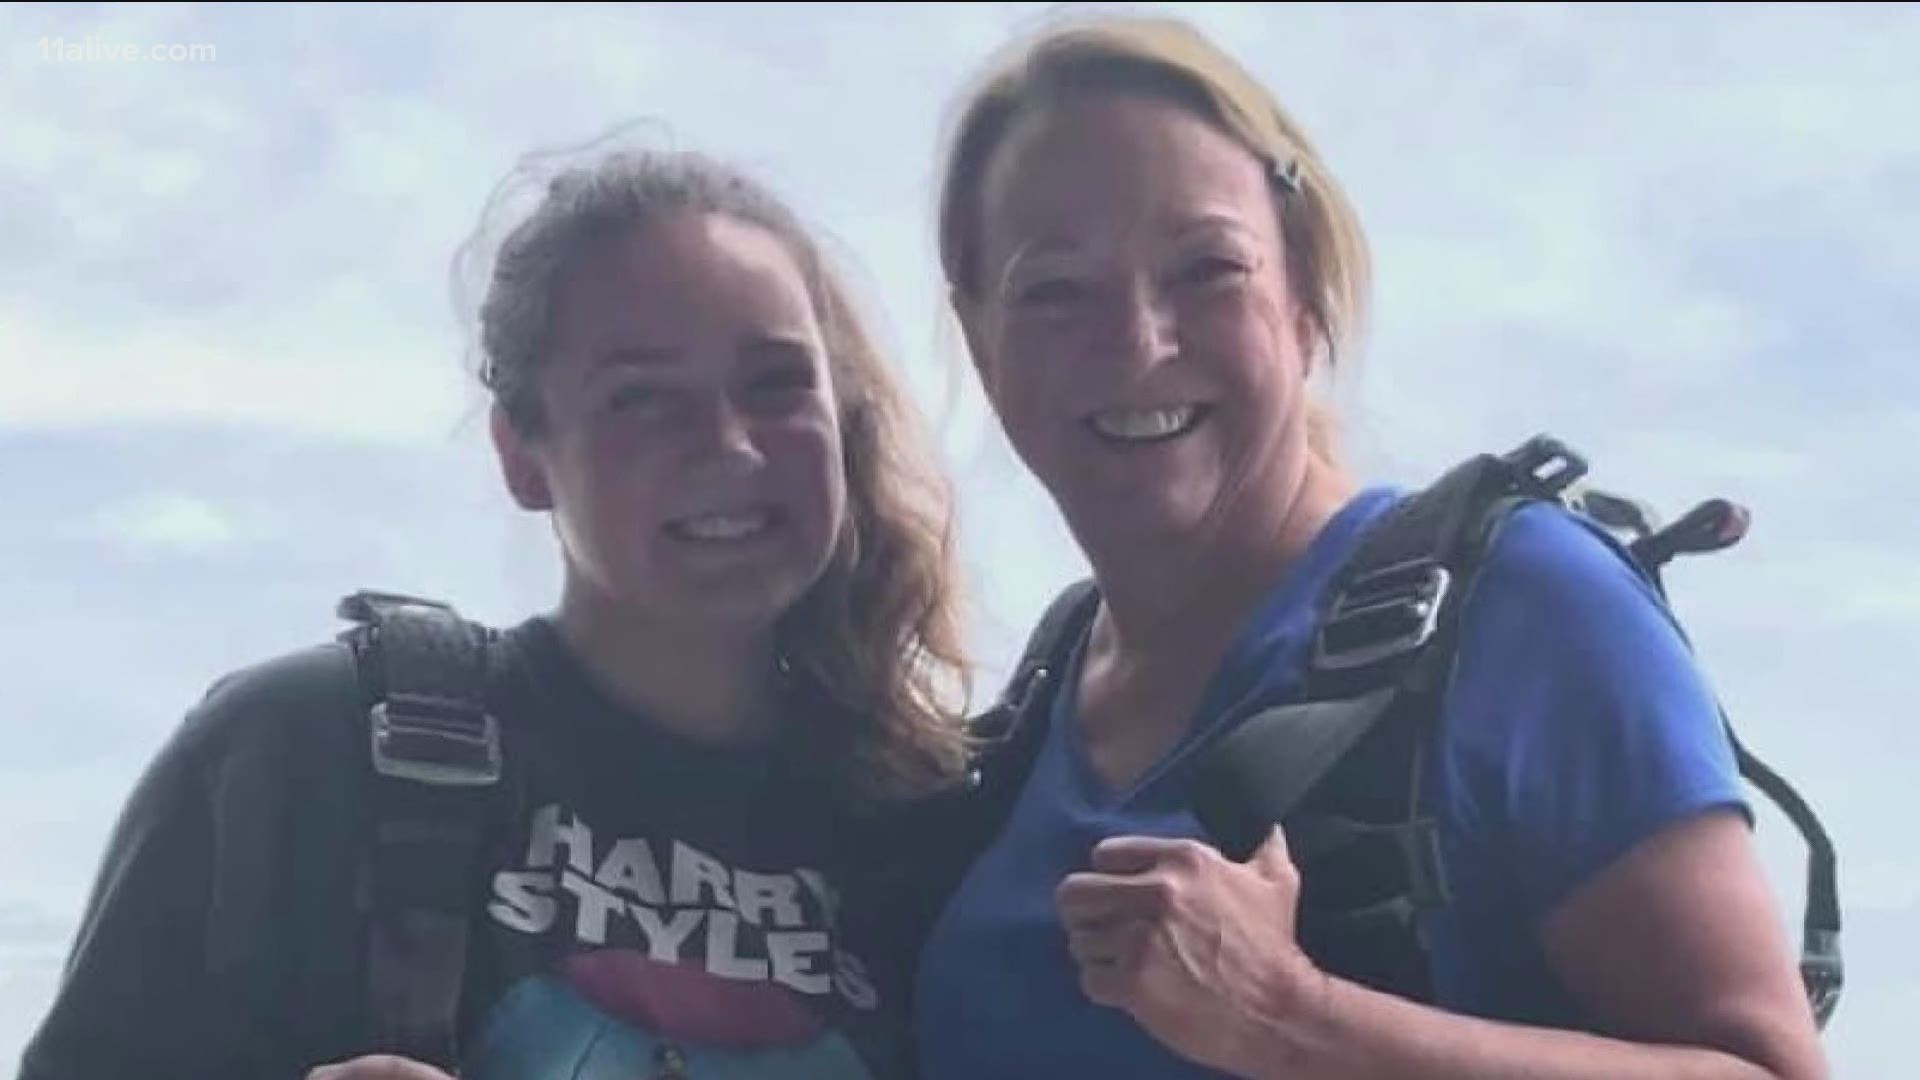 Jeanna Triplicata was on a tandem jump with an instructor near Thomaston when, according to investigators, both chutes failed to open properly.